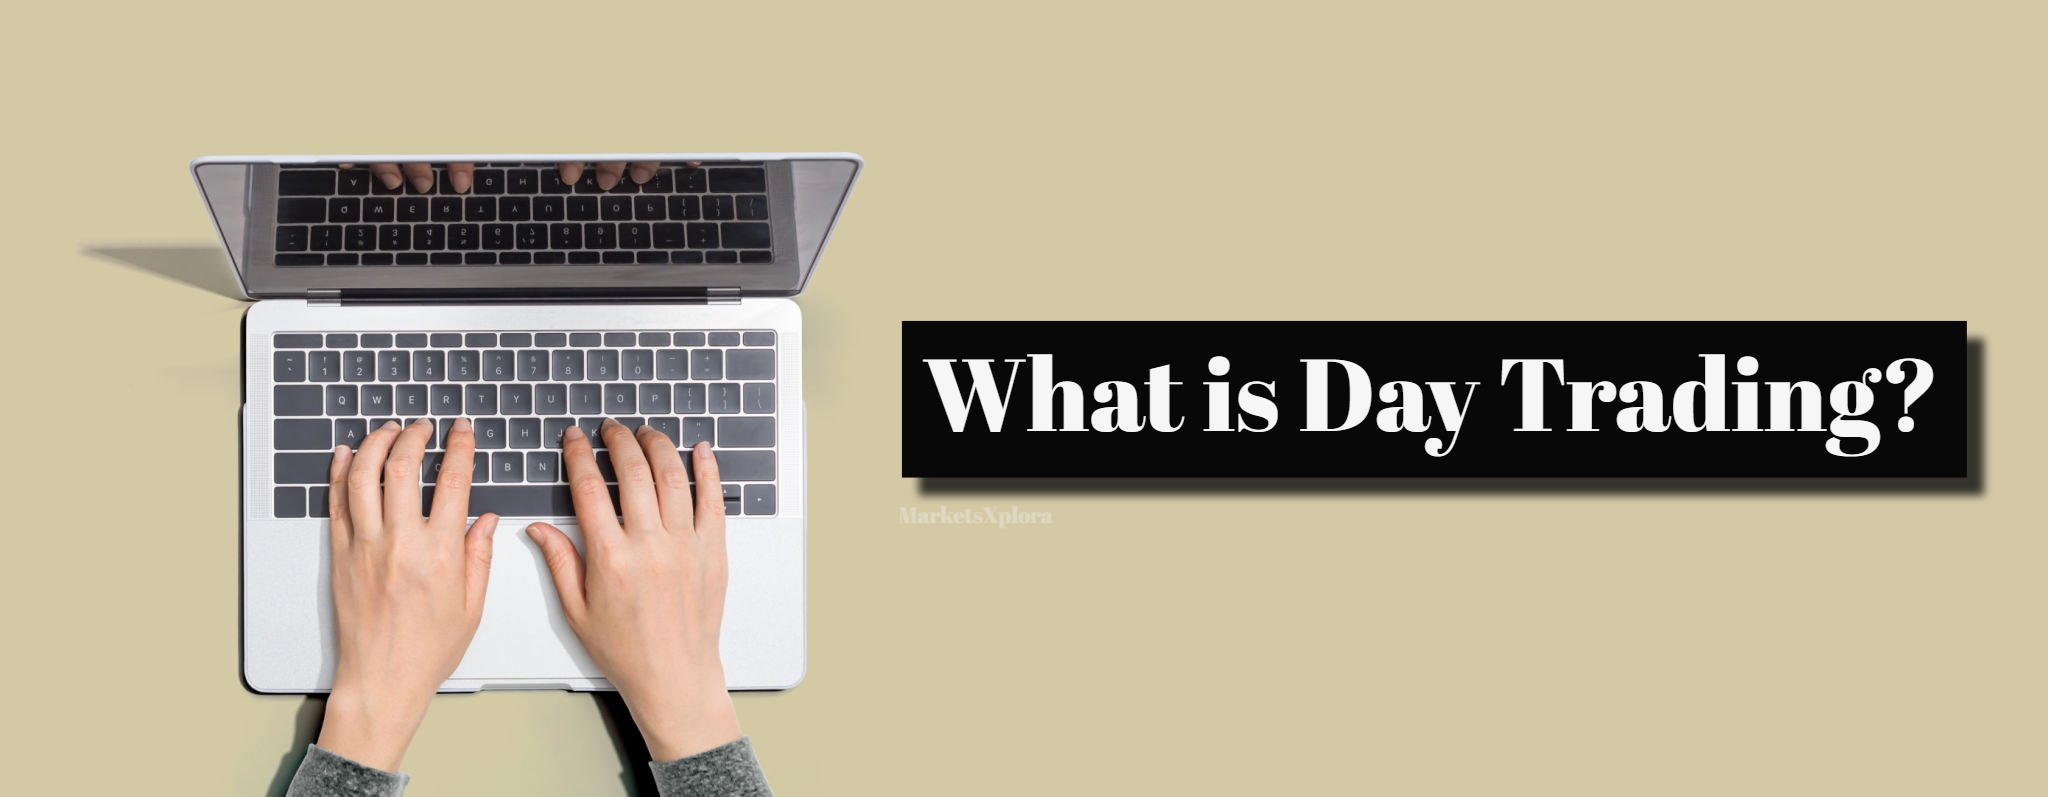 Asking "what is day trading forex/stocks?" This beginner's guide explains intraday strategies, technology & discipline needed to profit within accelerated timeframes.